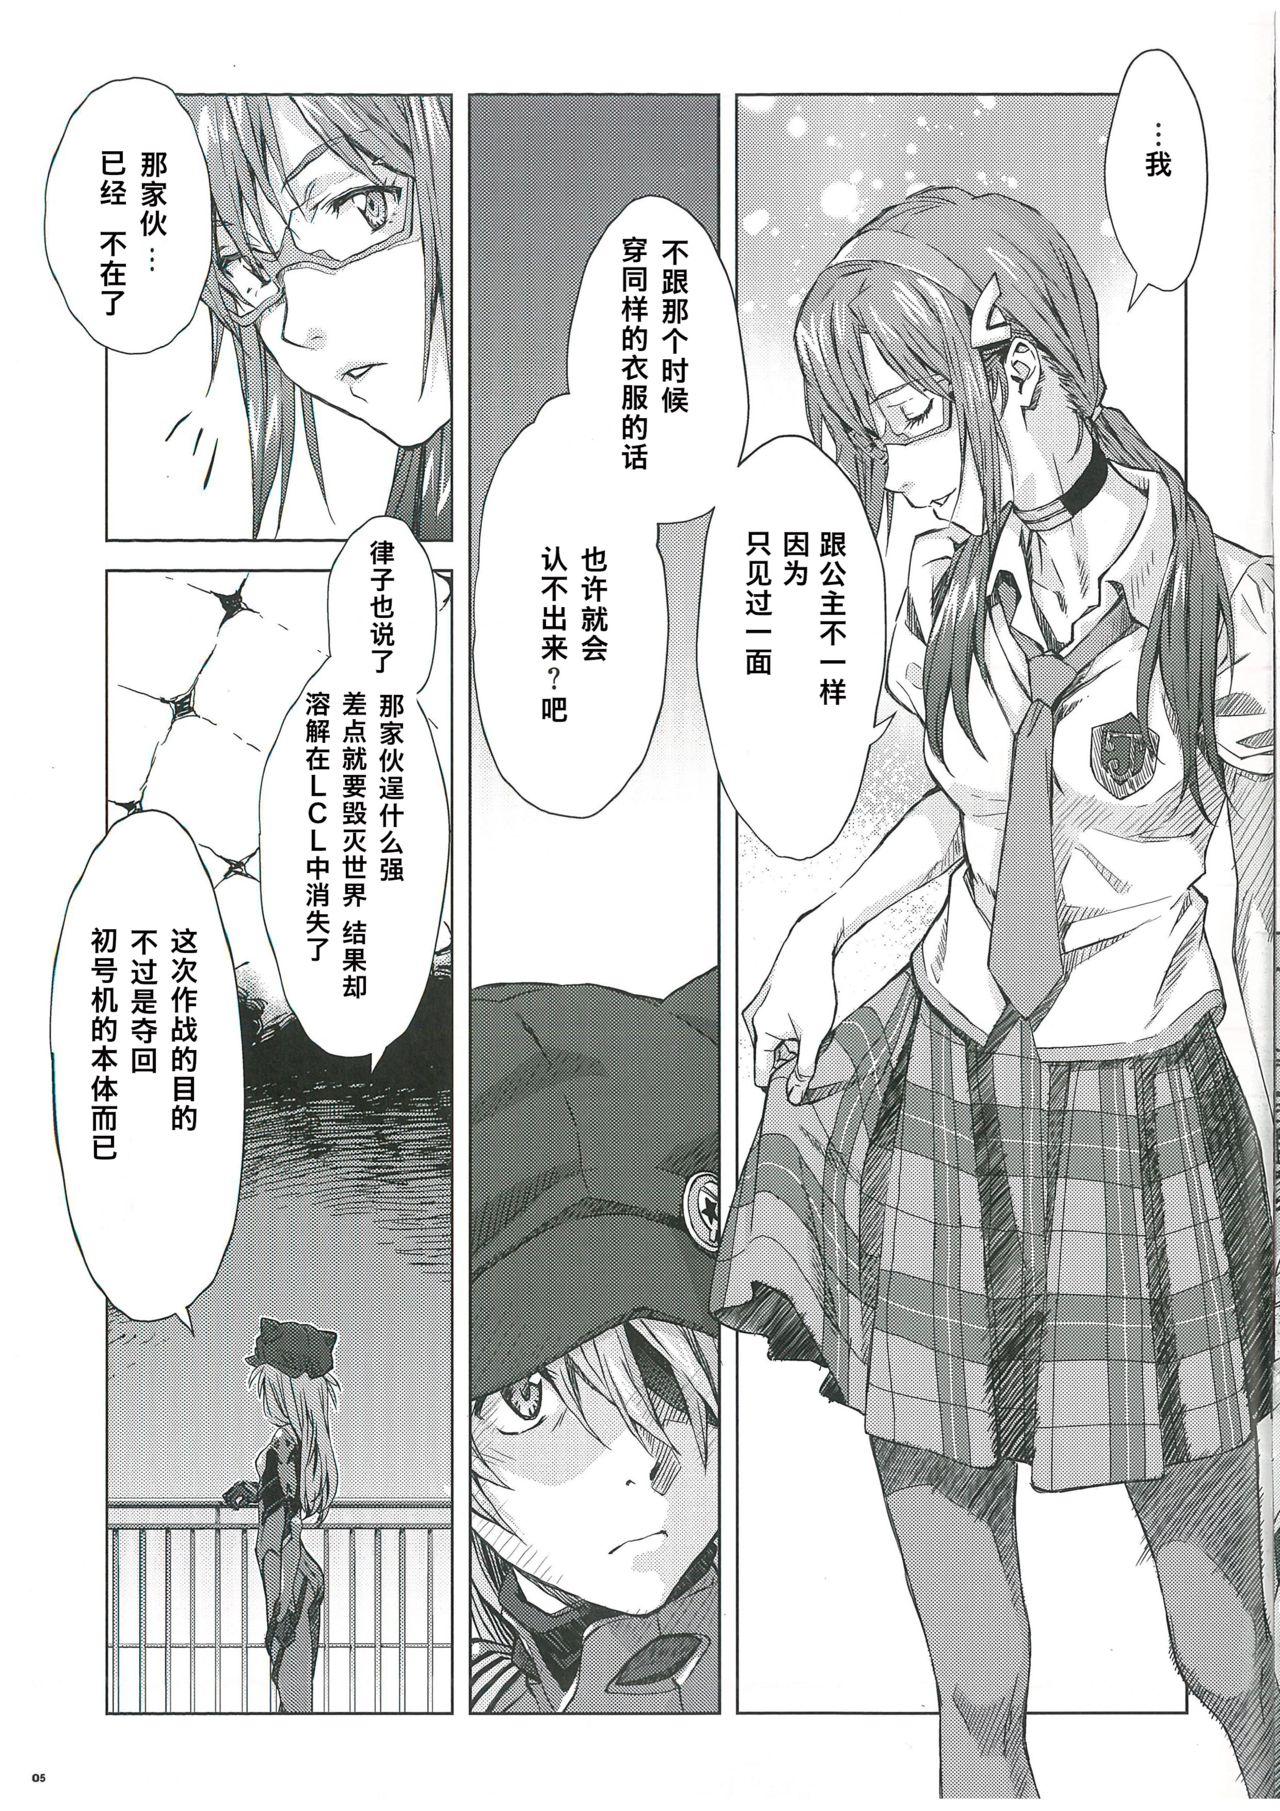 Home (EVA EXTRA EX)Evangelion 3.0 (-120 min.) and Illustrations [Chinese] - Neon genesis evangelion Behind - Page 7